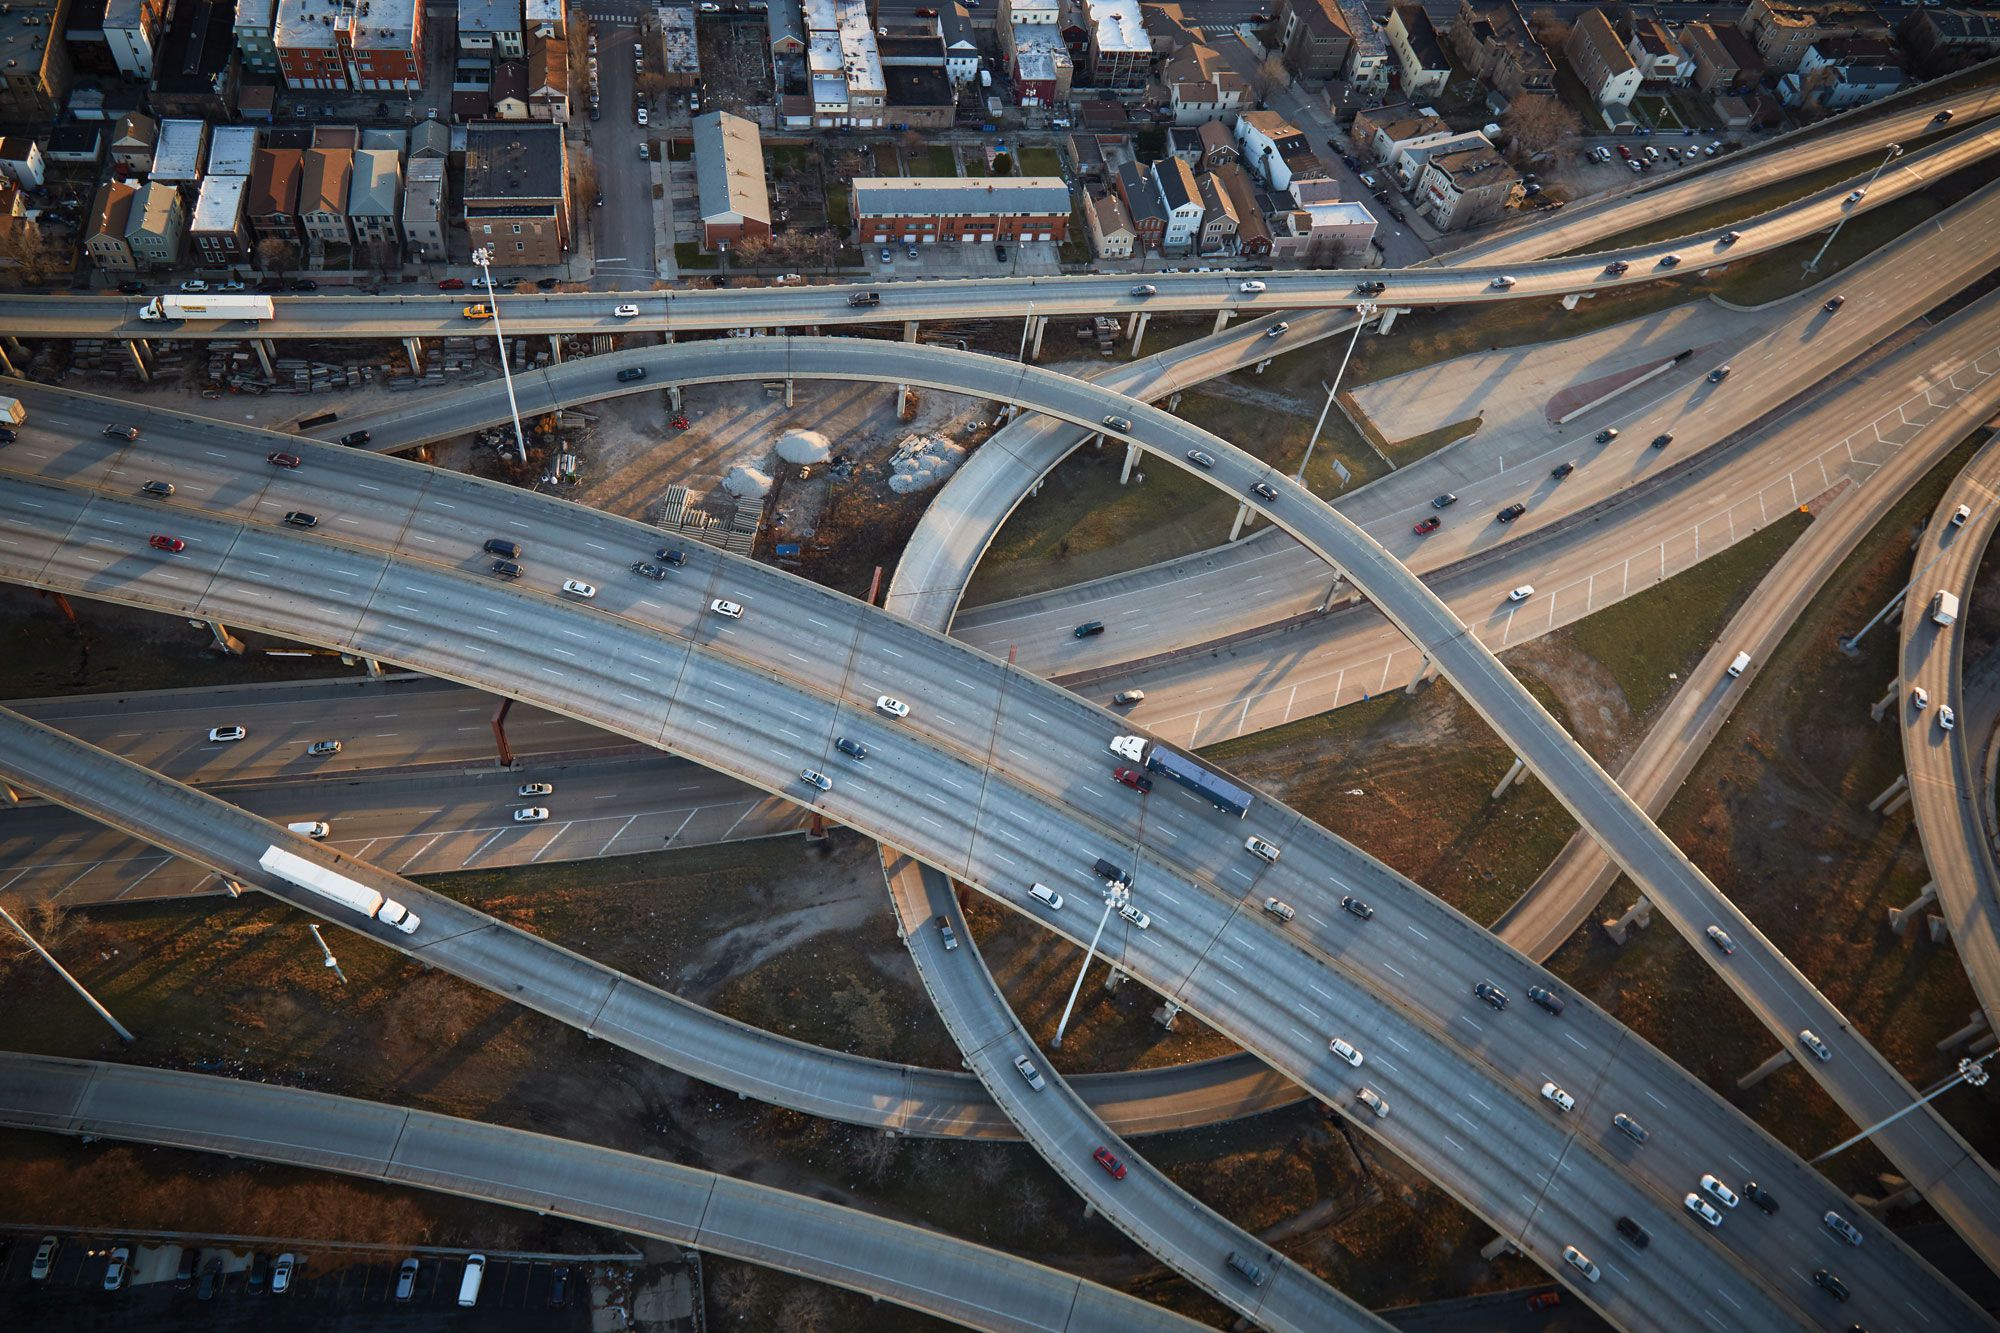 Chicago highway system from above.